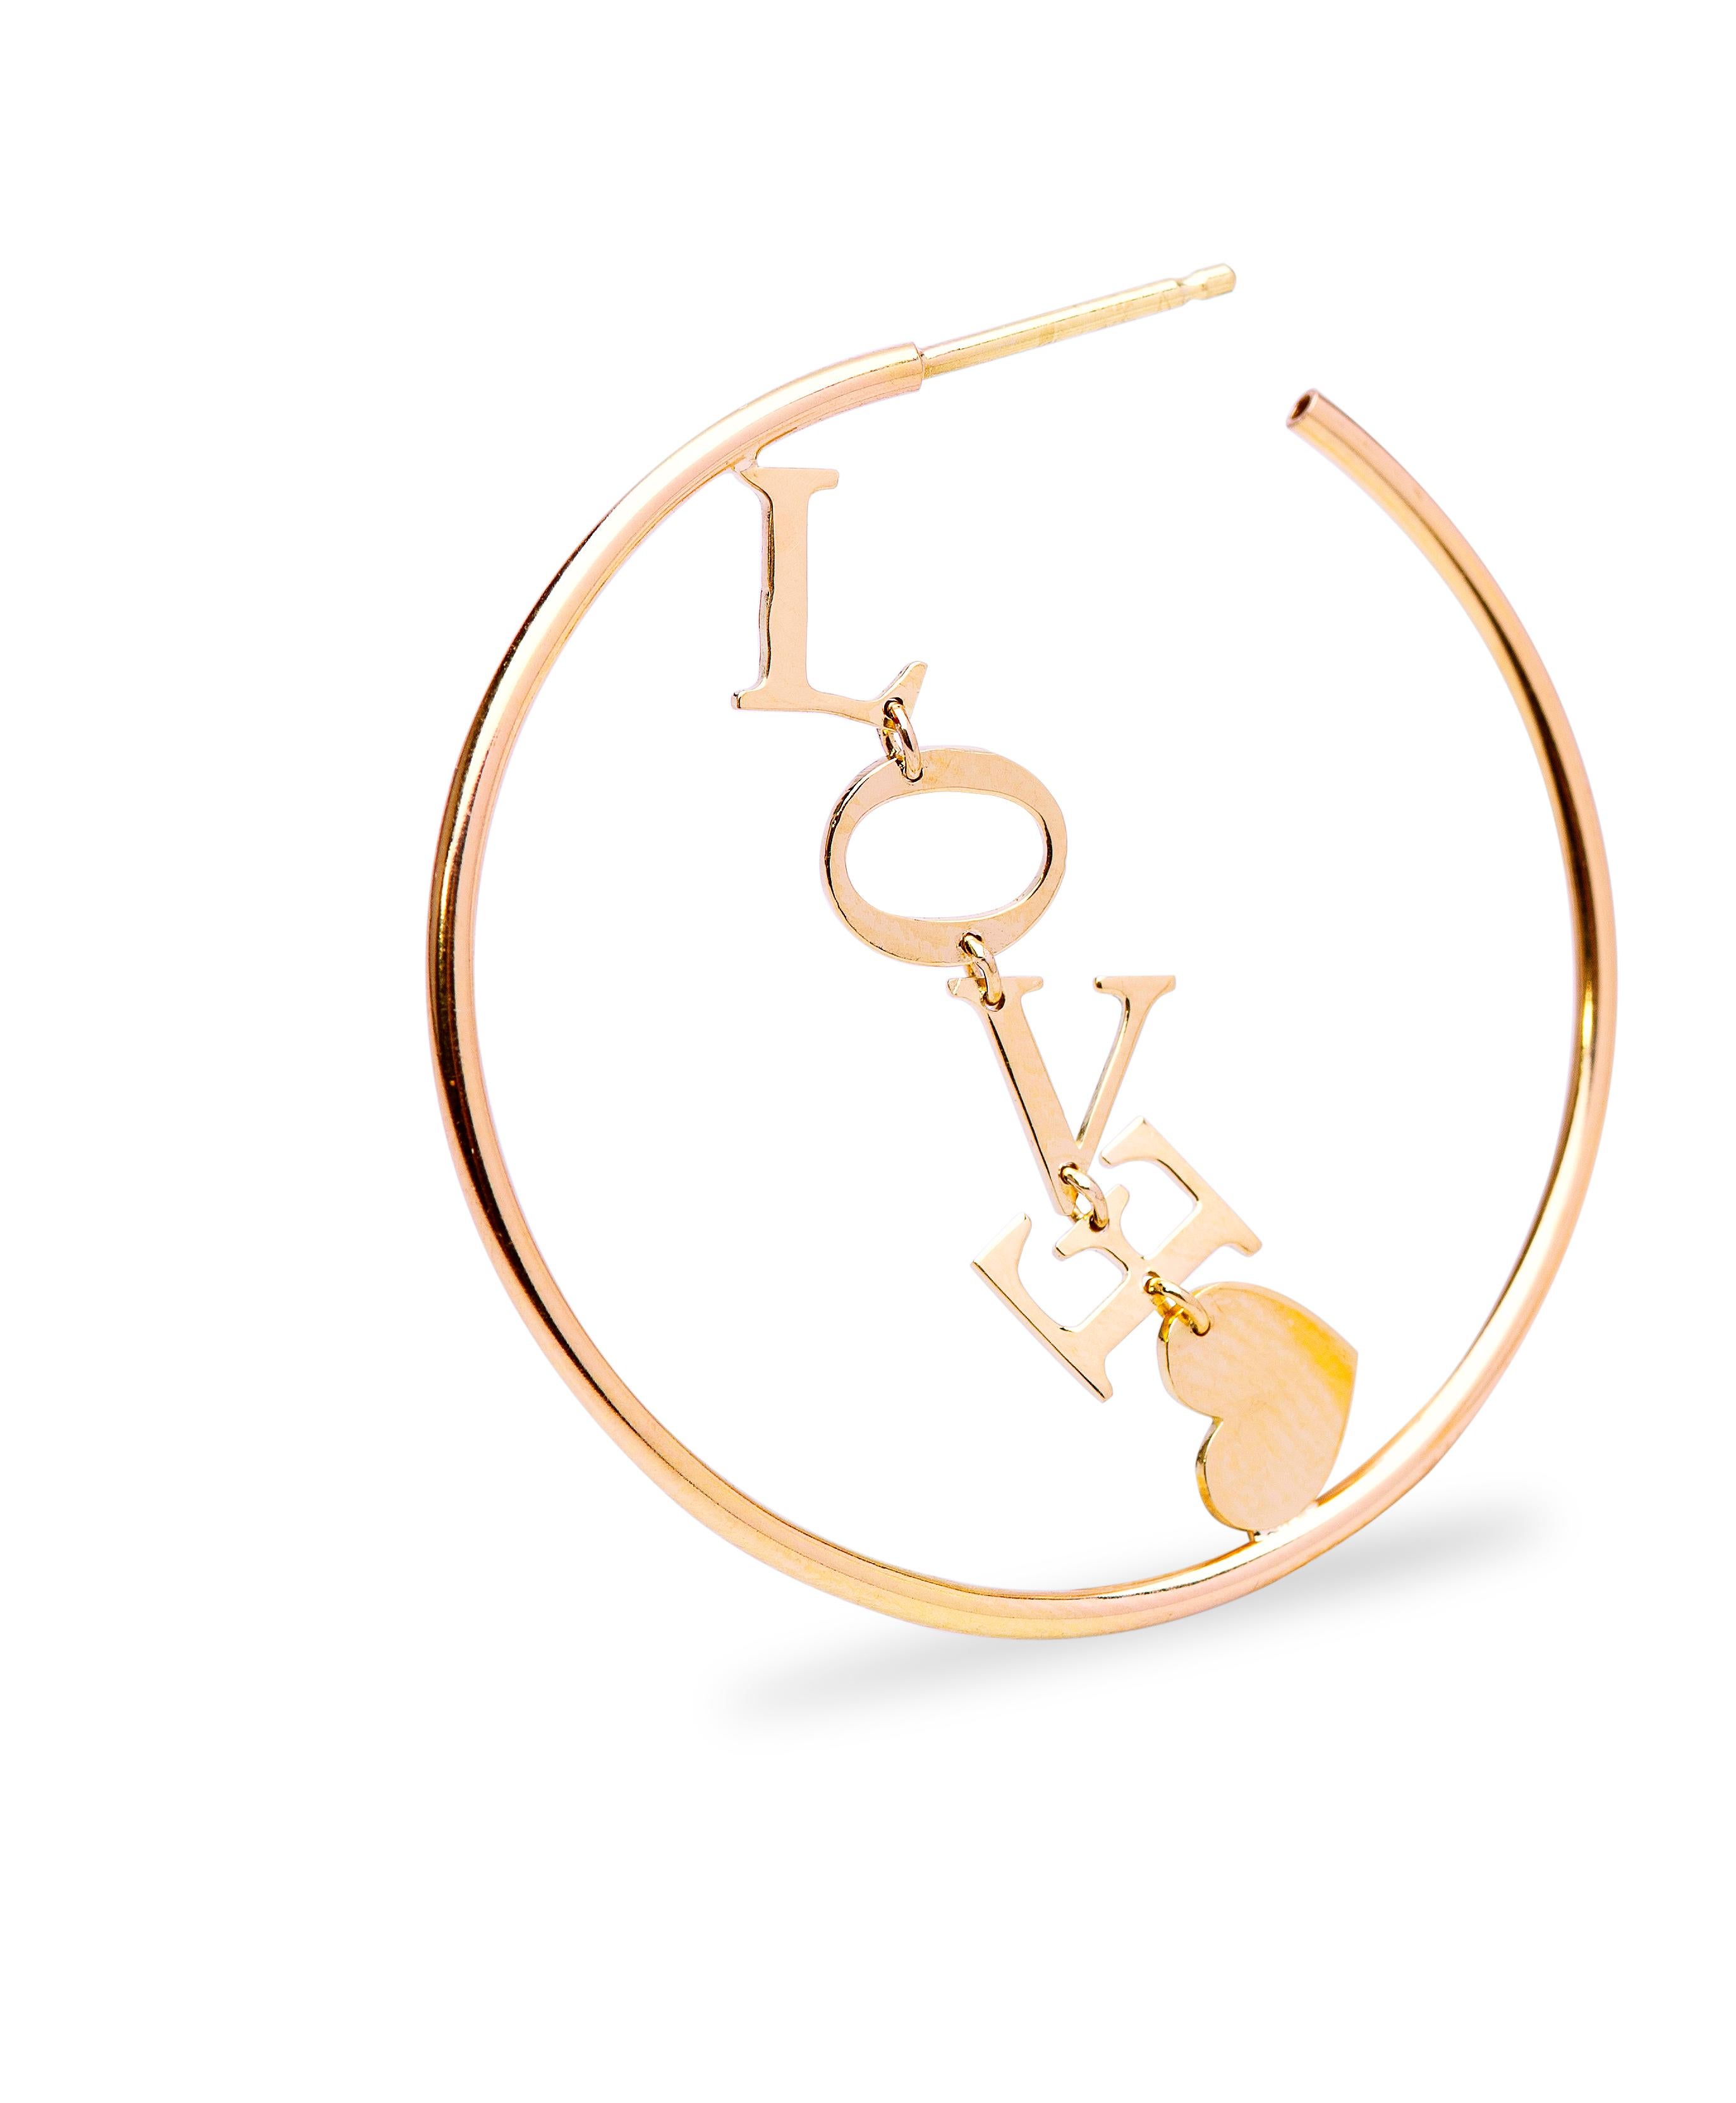 Contemporary 18 karat Yellow Gold Love Hoop Handcrafted Customizable Modern Design Earrings For Sale